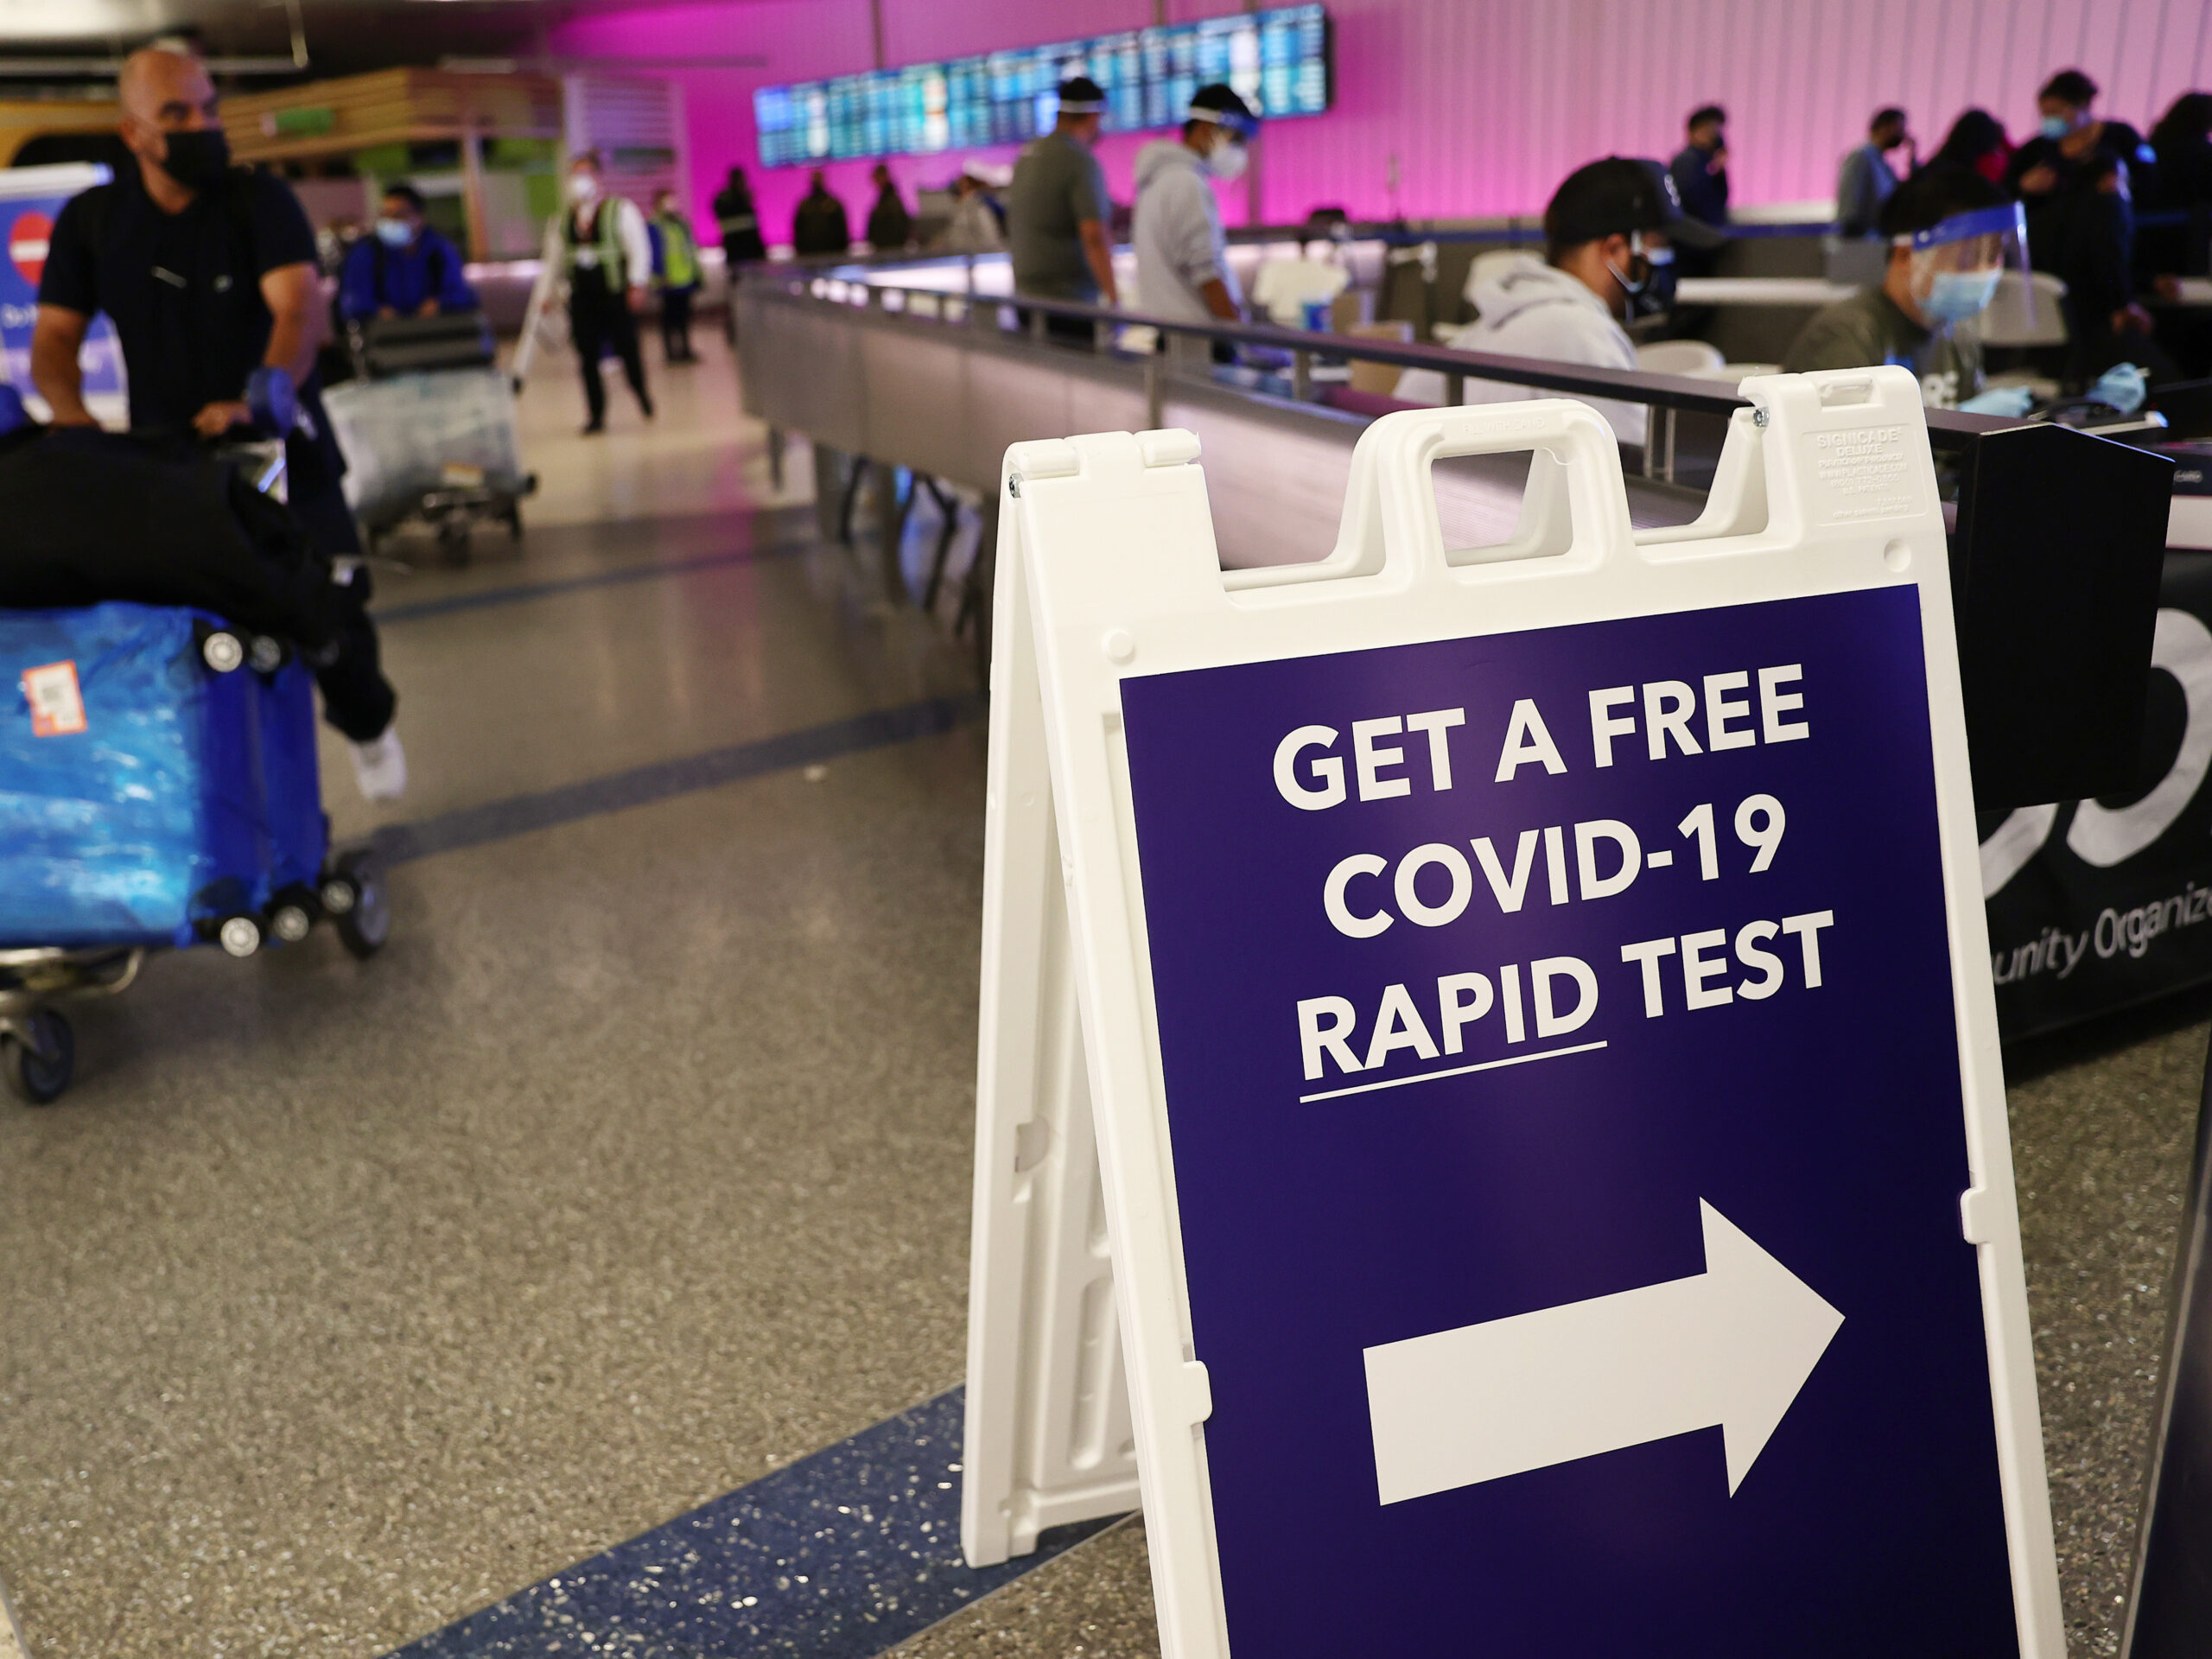 A sign in an airport for a free COVID-19 rapid test.